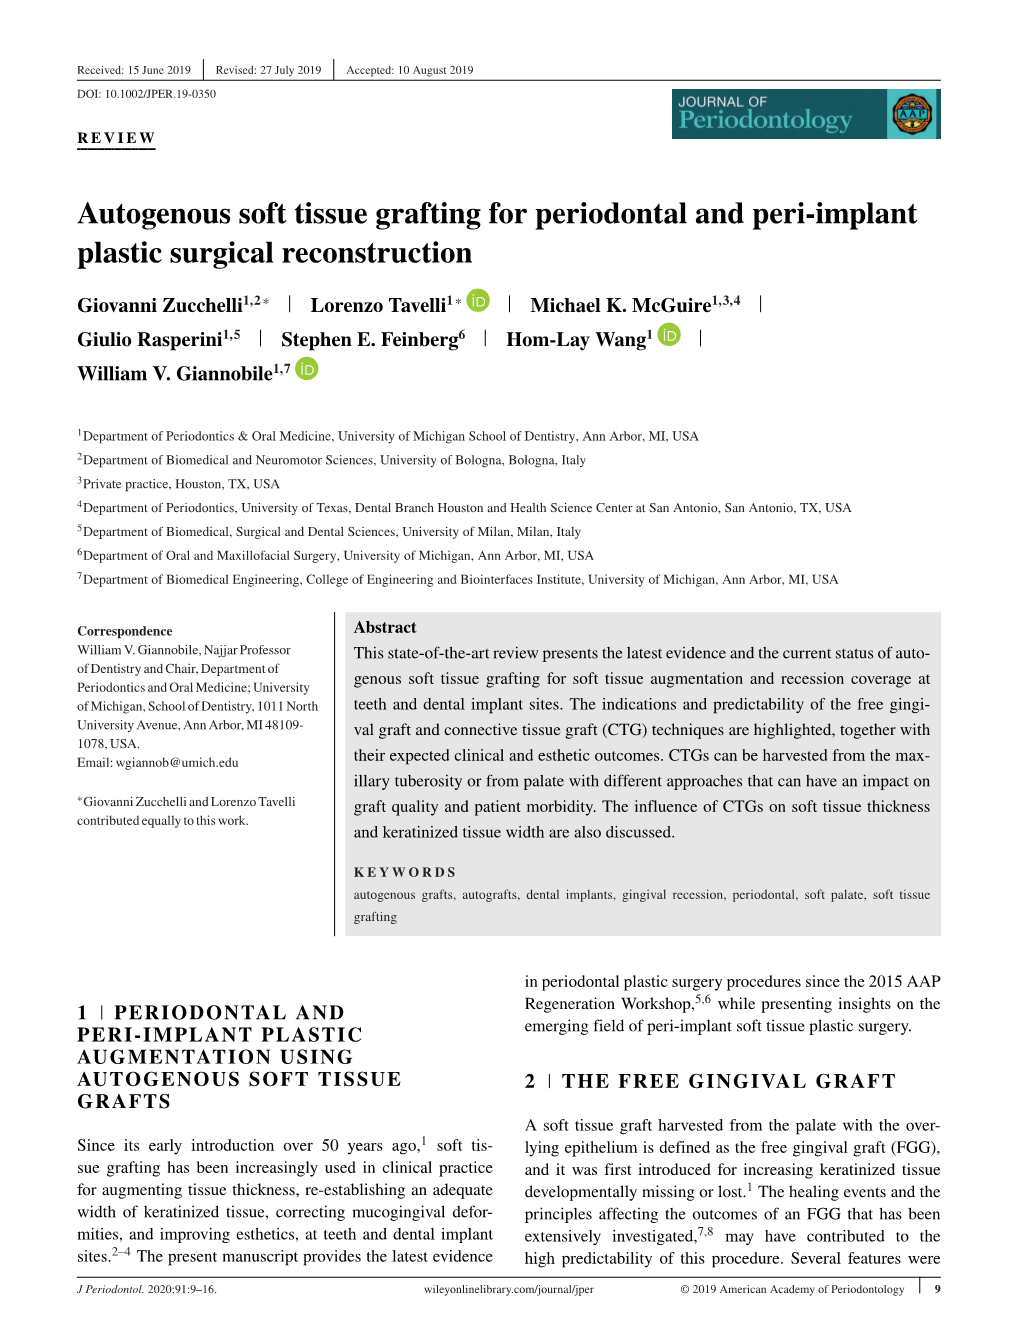 Autogenous Soft Tissue Grafting for Periodontal and Peri-Implant Plastic Surgical Reconstruction